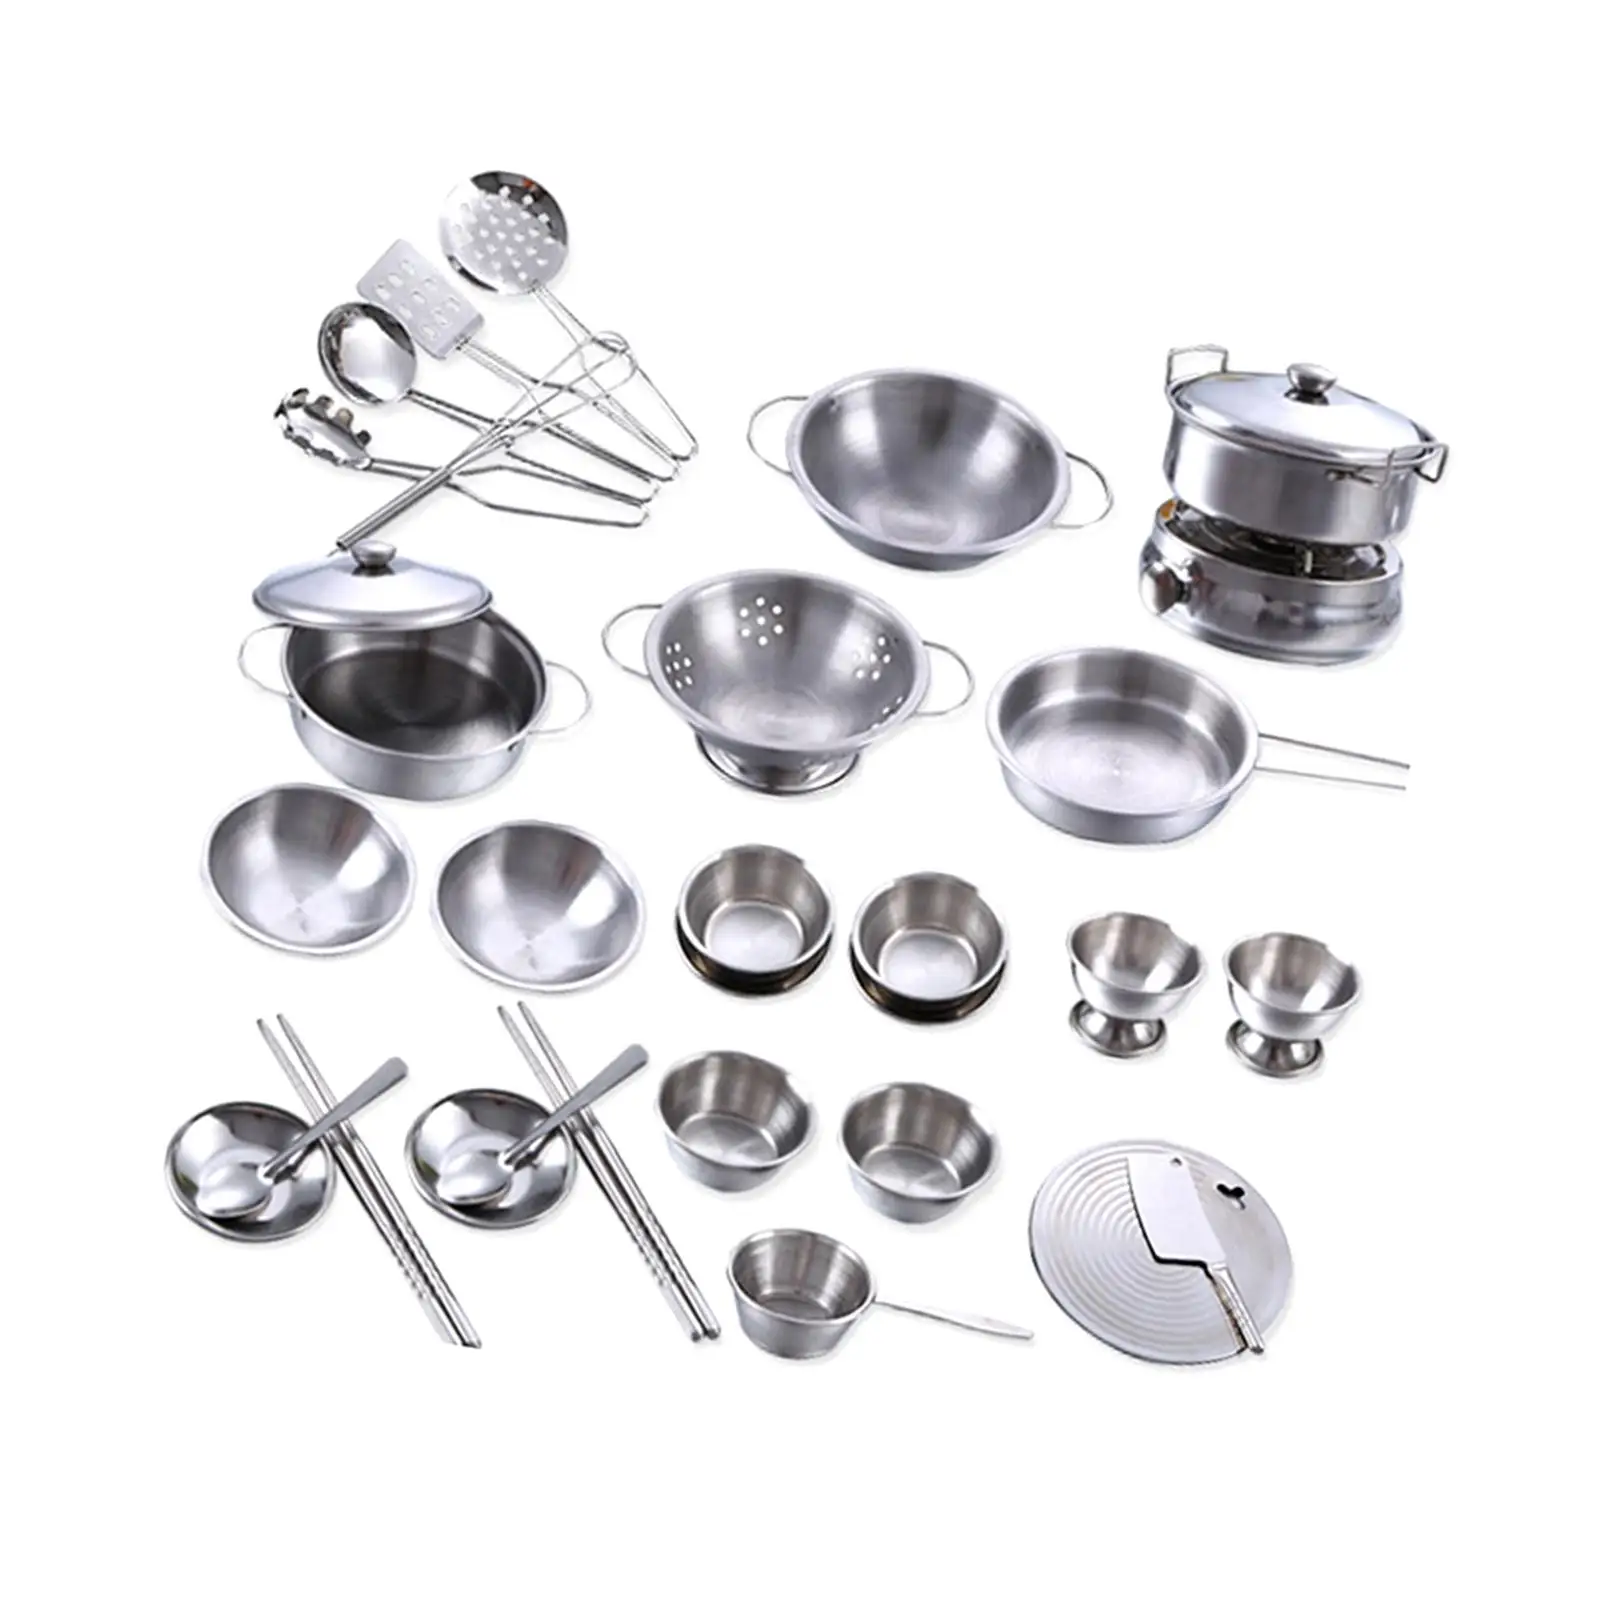 25 Pieces Kids Pretend Play Cookware Set Kitchen Toys Accessories Realistic